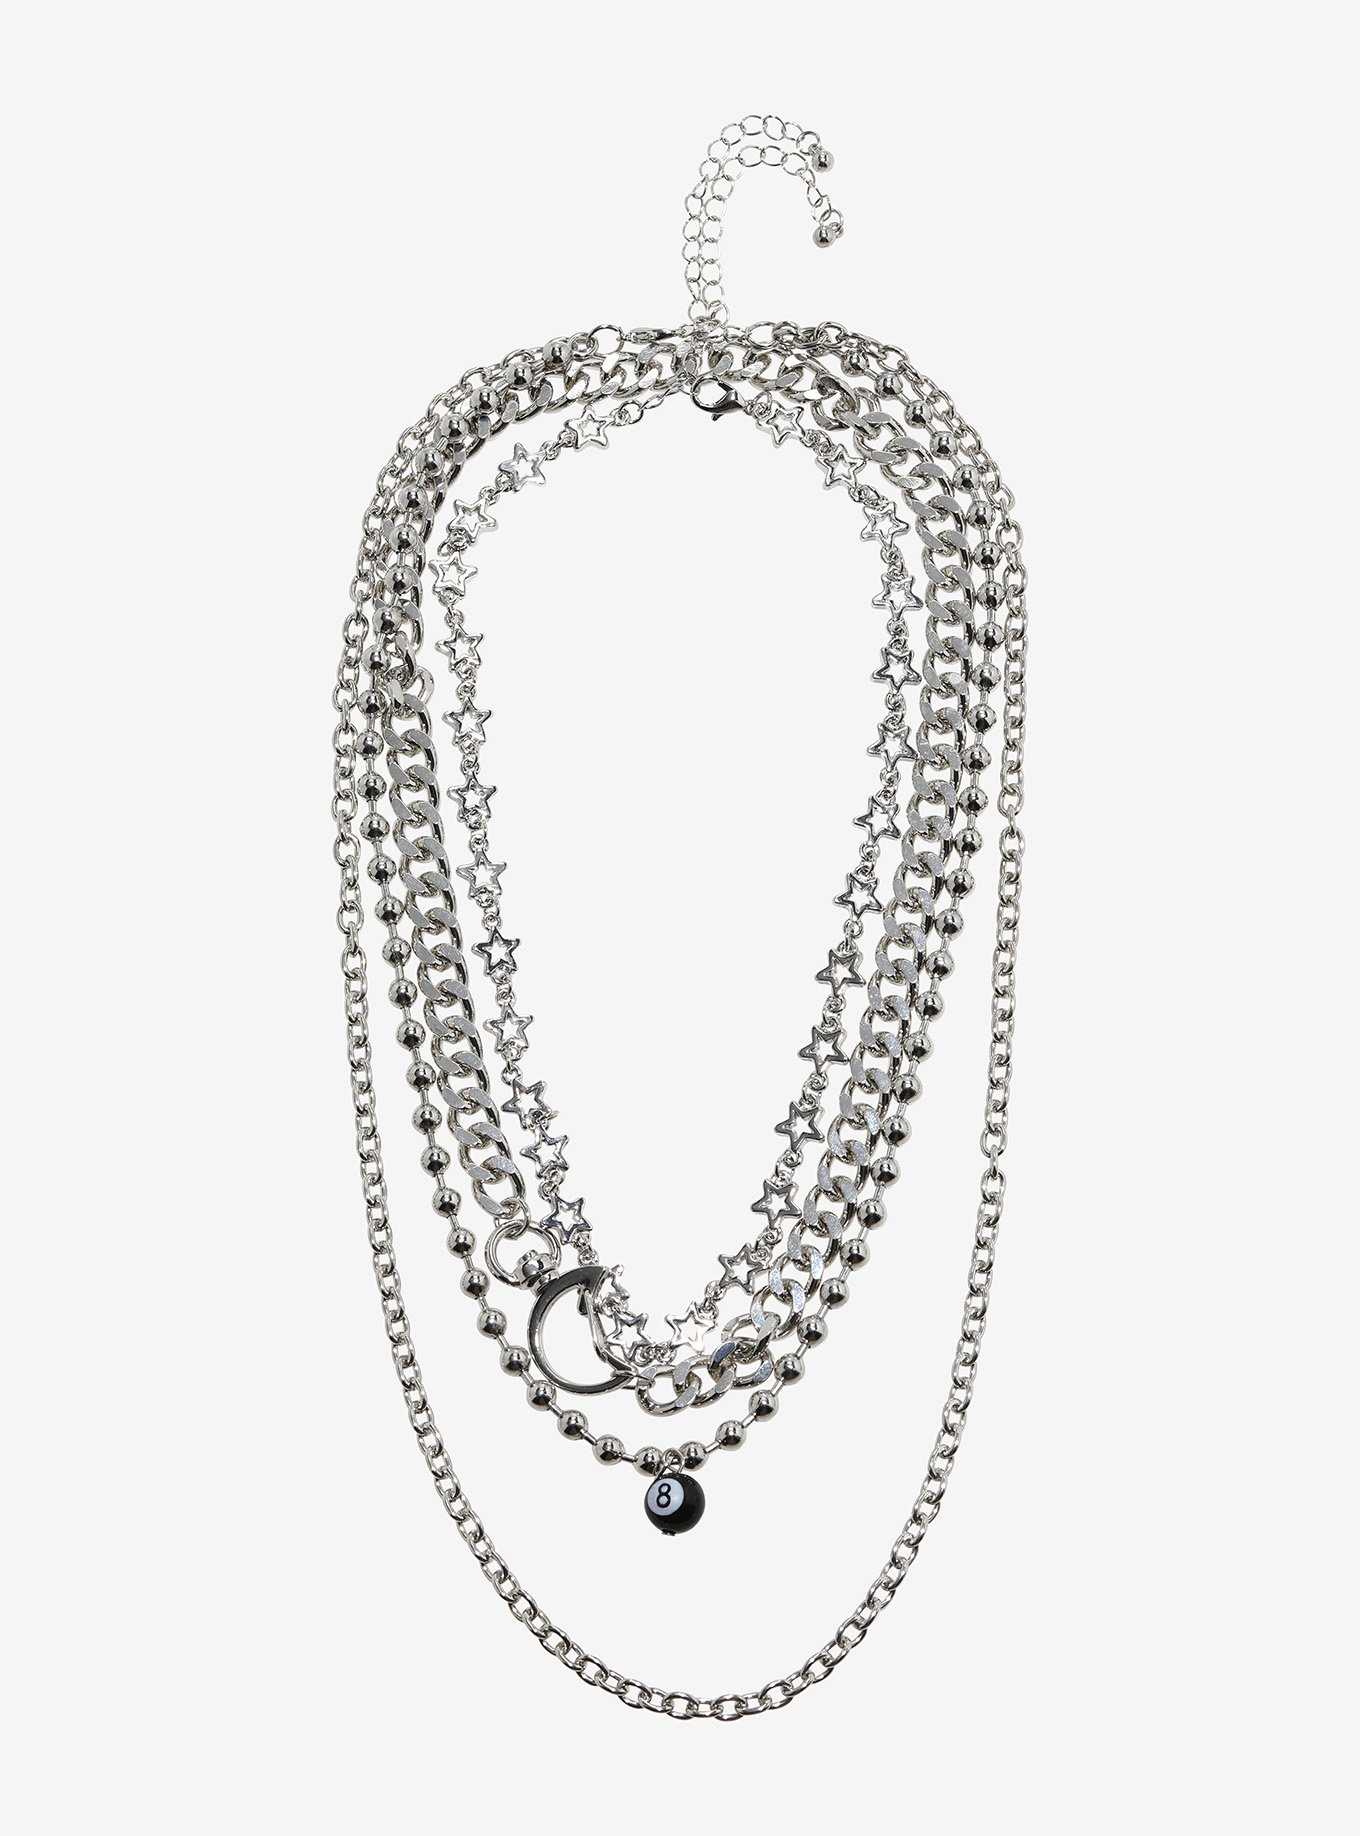 8 Ball Star Chain Necklace Set, , hi-res